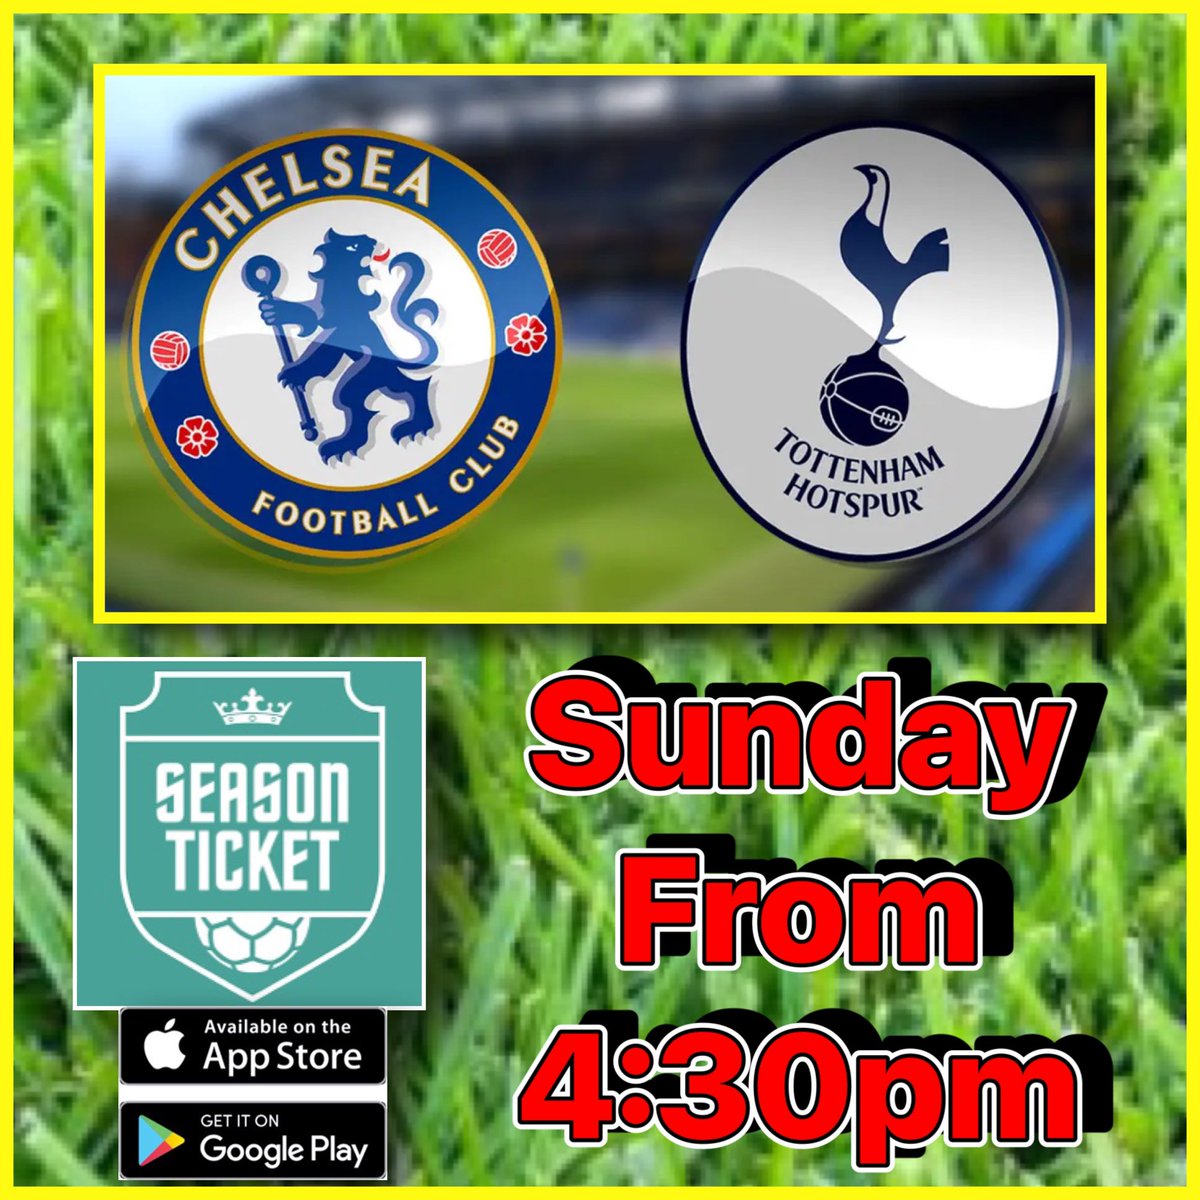 Another 2 premiership football games on today!
Nottingham forest take on West Ham from 2pm
Then the big game from 4:30pm! Will we see another defence crumble? will it be a boring draw? You never can Tell when Spurs visit Stamford Bridge!
Chelsea v Tottenham Live from 4:30pm https://t.co/UjEOwRUZVb